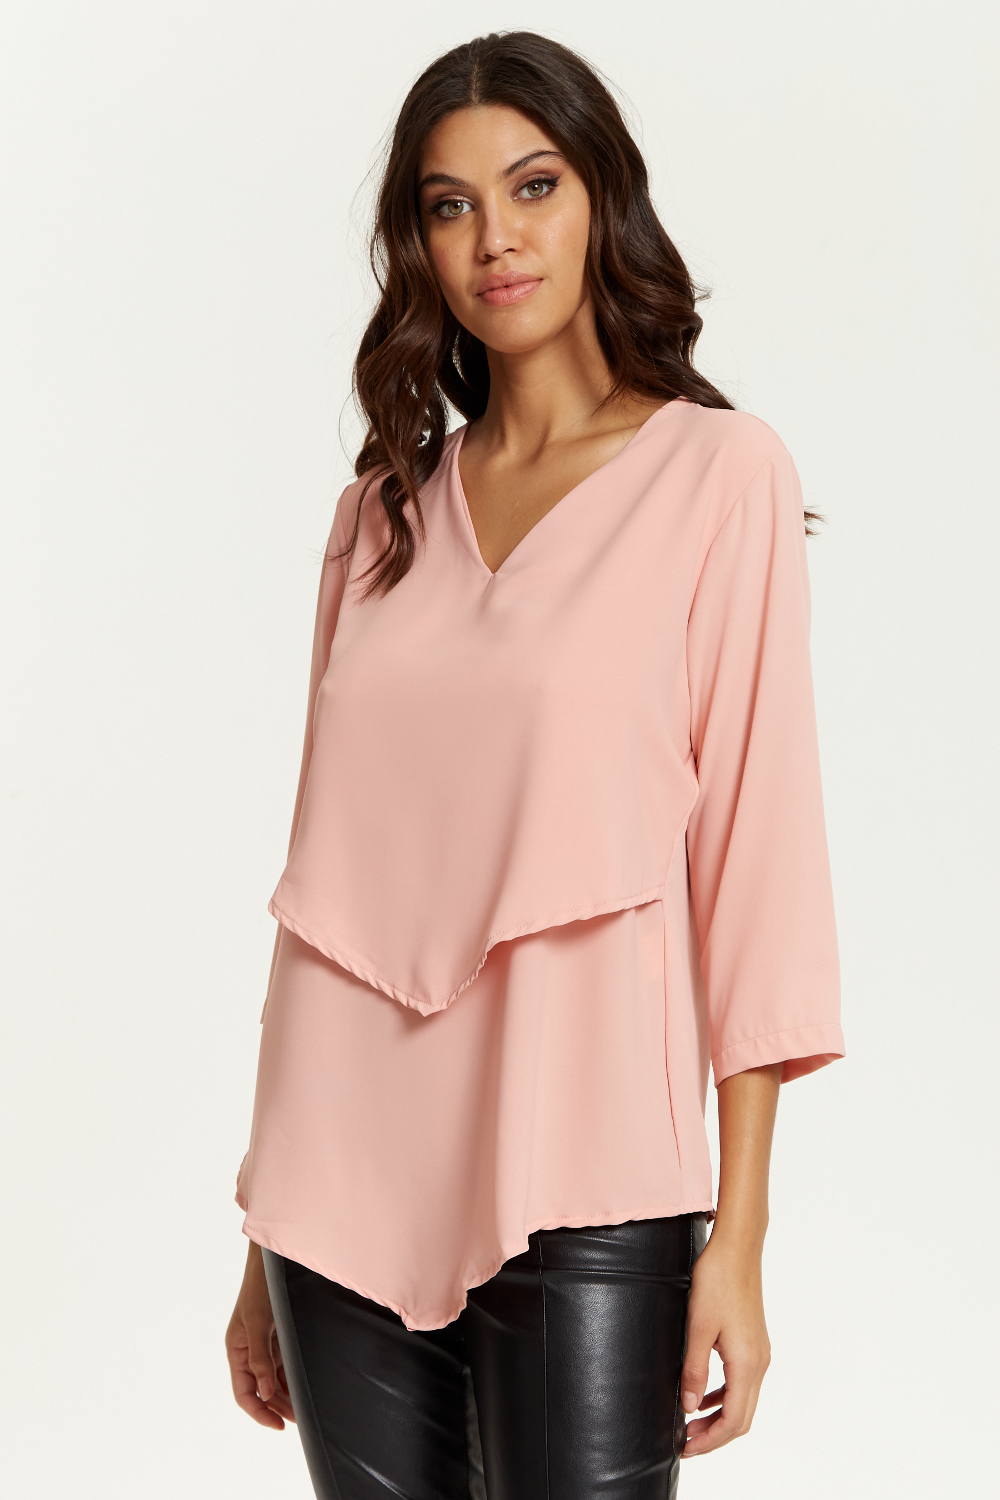 3/4 Sleeves V Neck Layered Relaxed Fit Top in Pink GLR FASHION NETWORKING